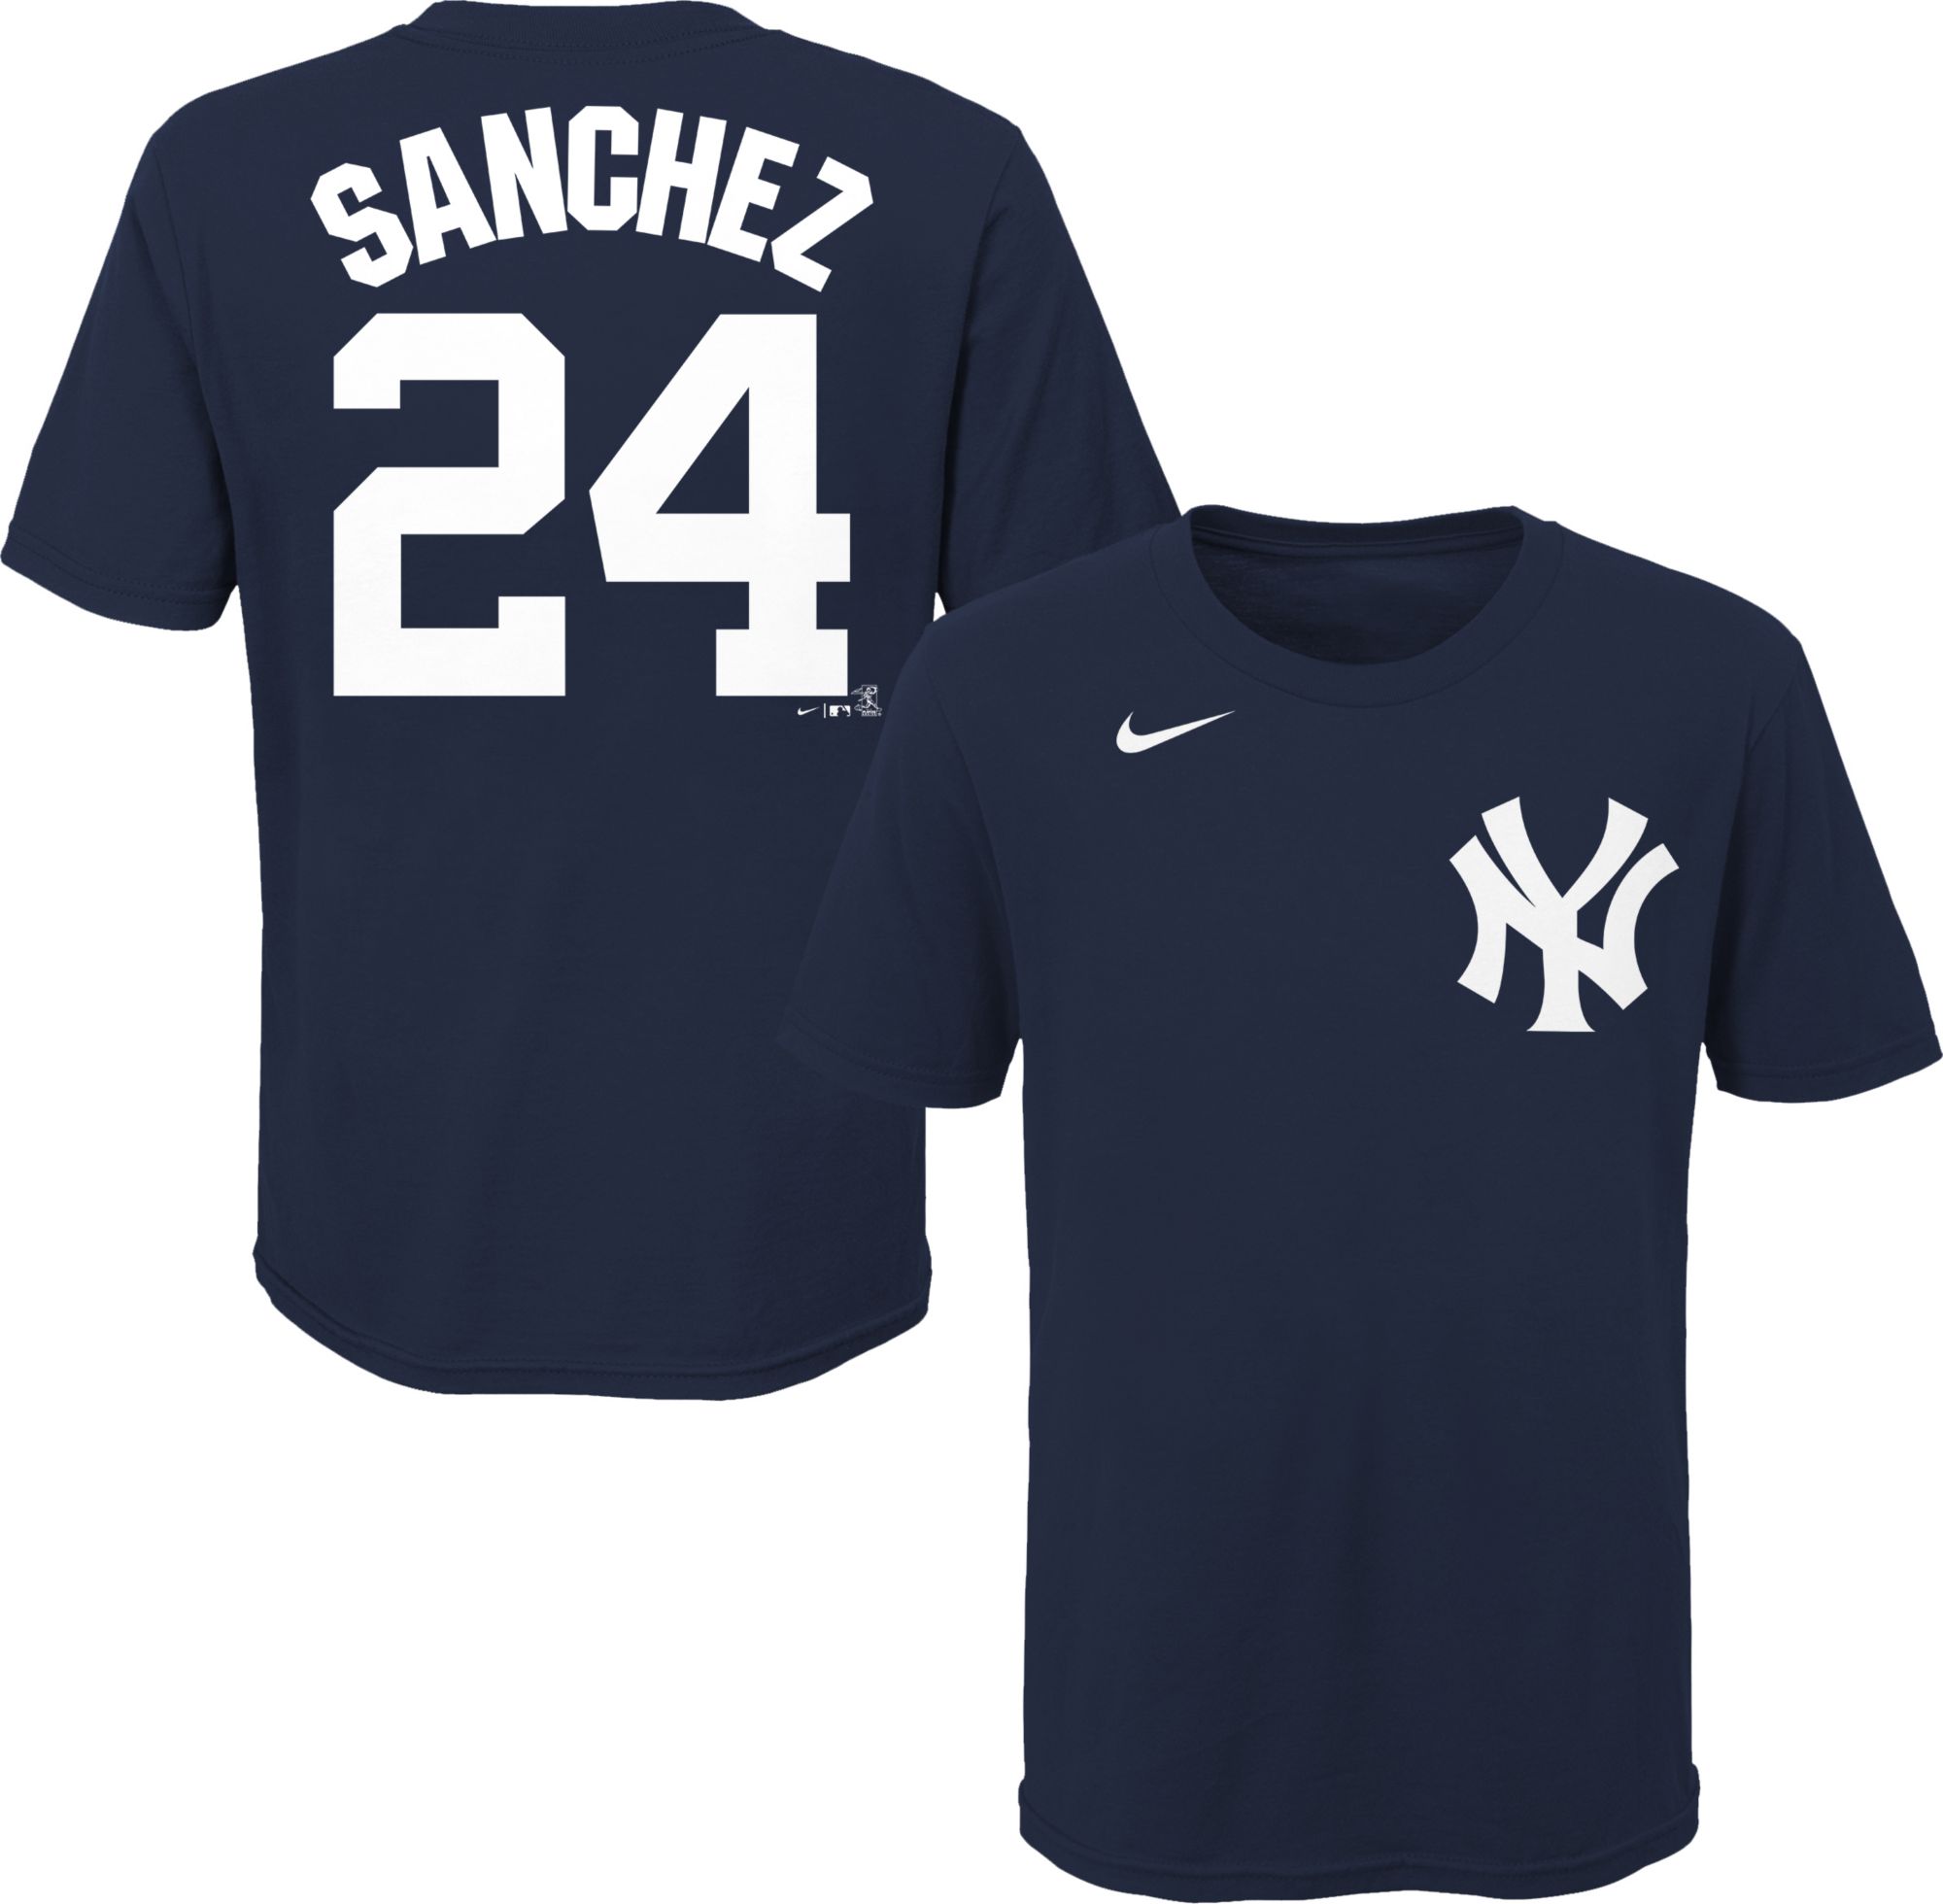 gary sanchez jersey youth